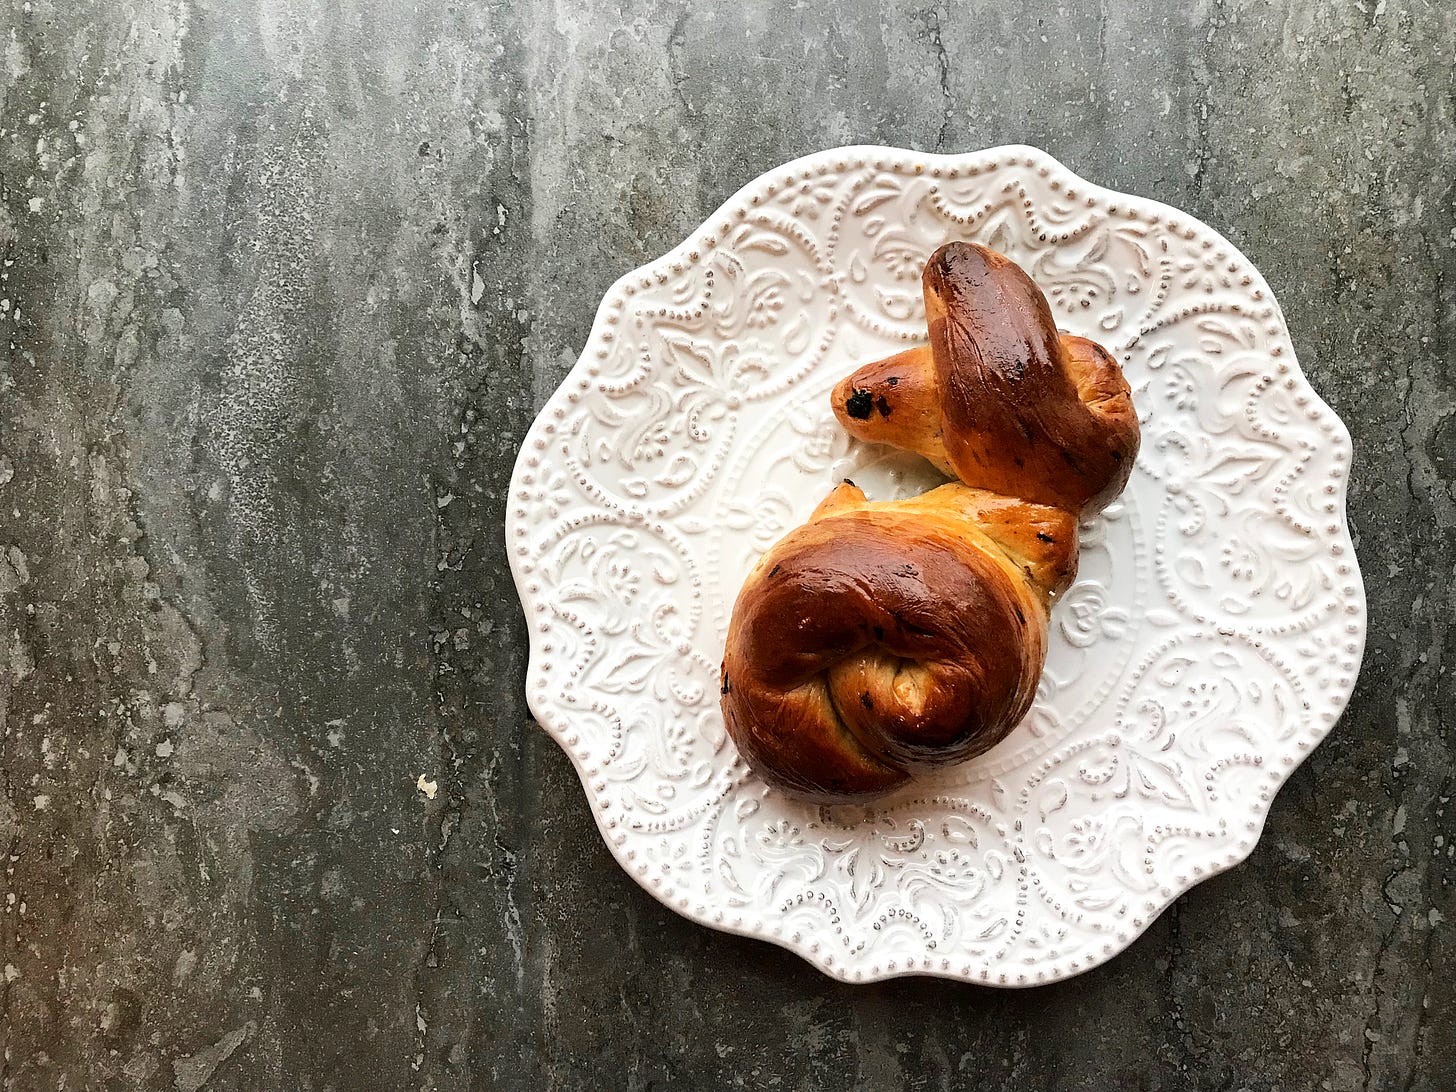 A baked hot cross bunny on an embossed white plate. You can see the twists of dough in shades of gold and sienna. There's a bit of currant on one ear, making it look as if it has a spot. The glaze is shiny. It looks as if it's hopping away. 